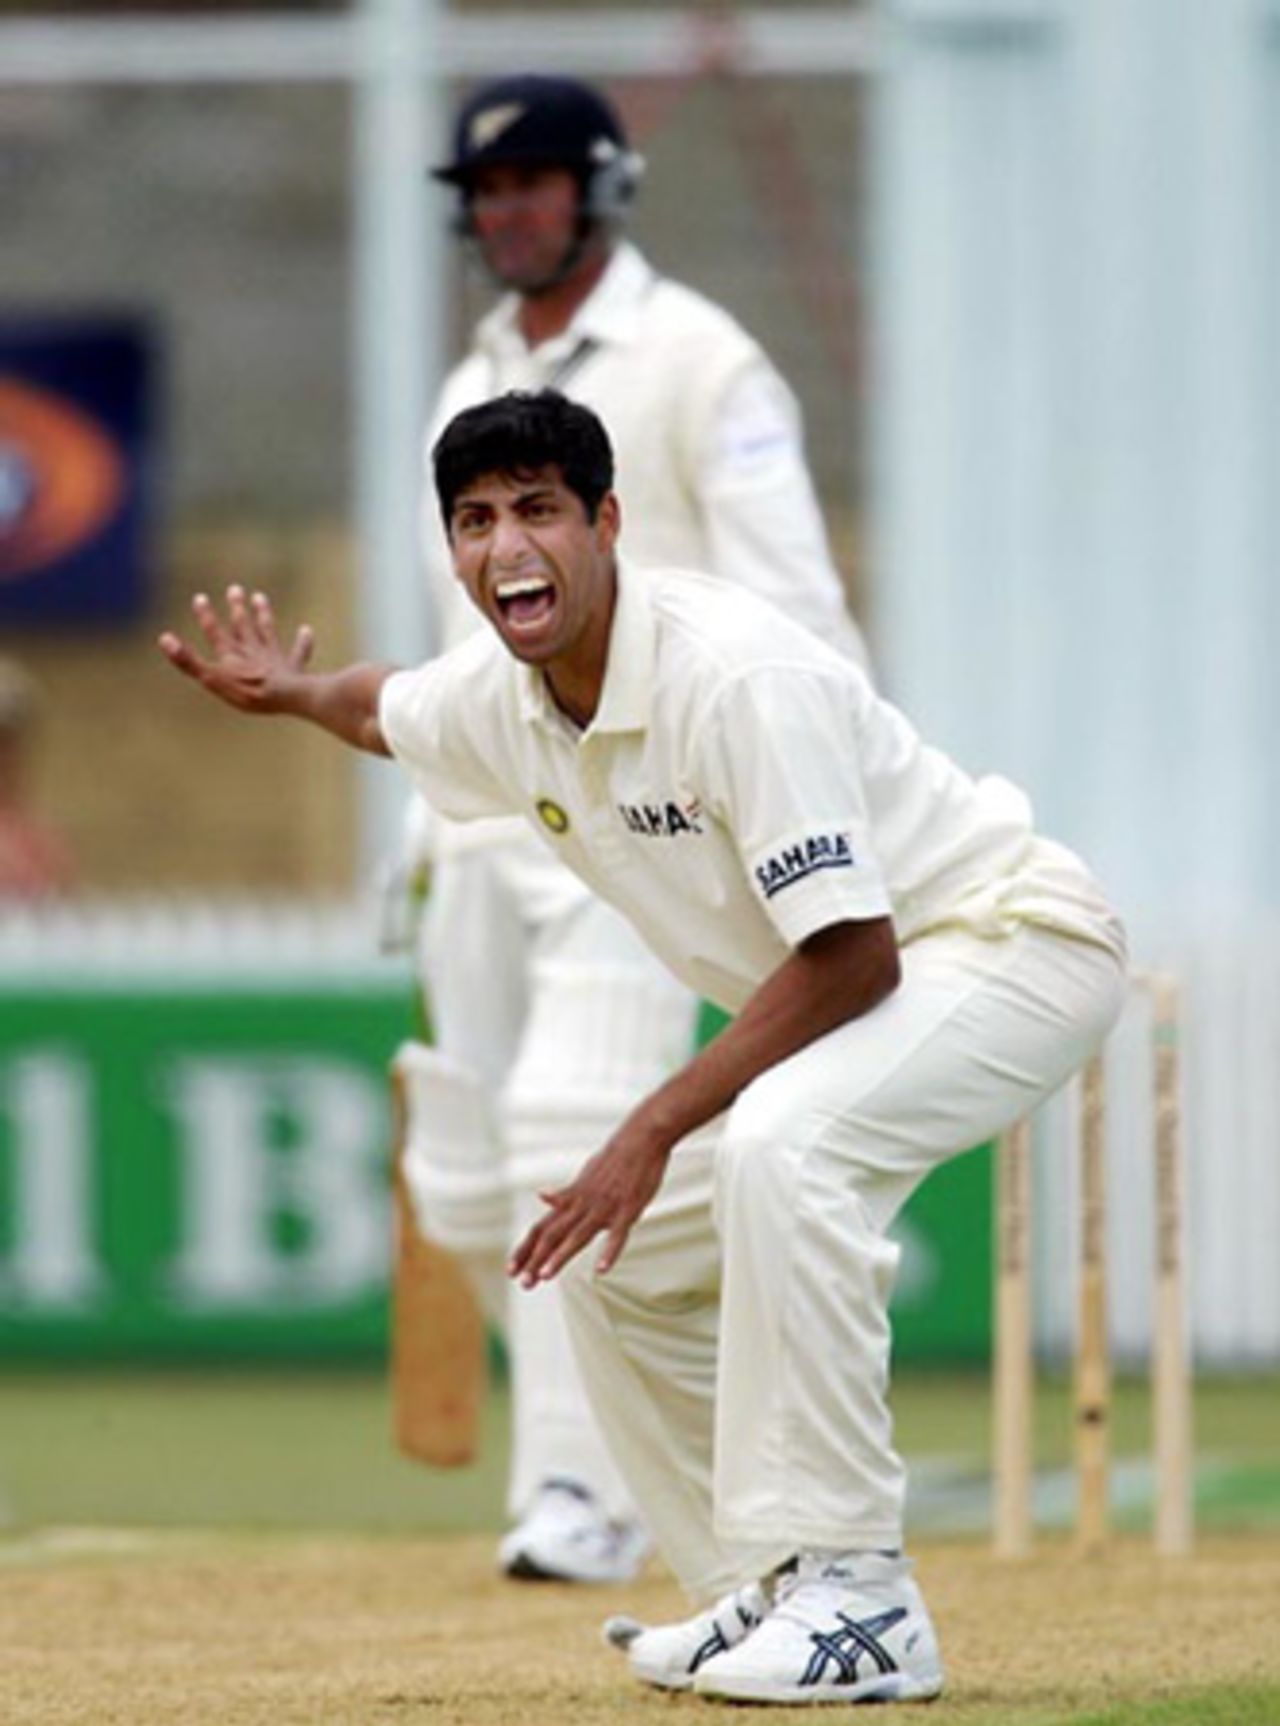 Indian bowler Ashish Nehra unsucessfully appeals for lbw against New Zealand batsman Nathan Astle during his second innings spell of 3-34 from 16.2 overs. 2nd Test: New Zealand v India at Westpac Park, Hamilton, 19-23 December 2002 (22 December 2002).